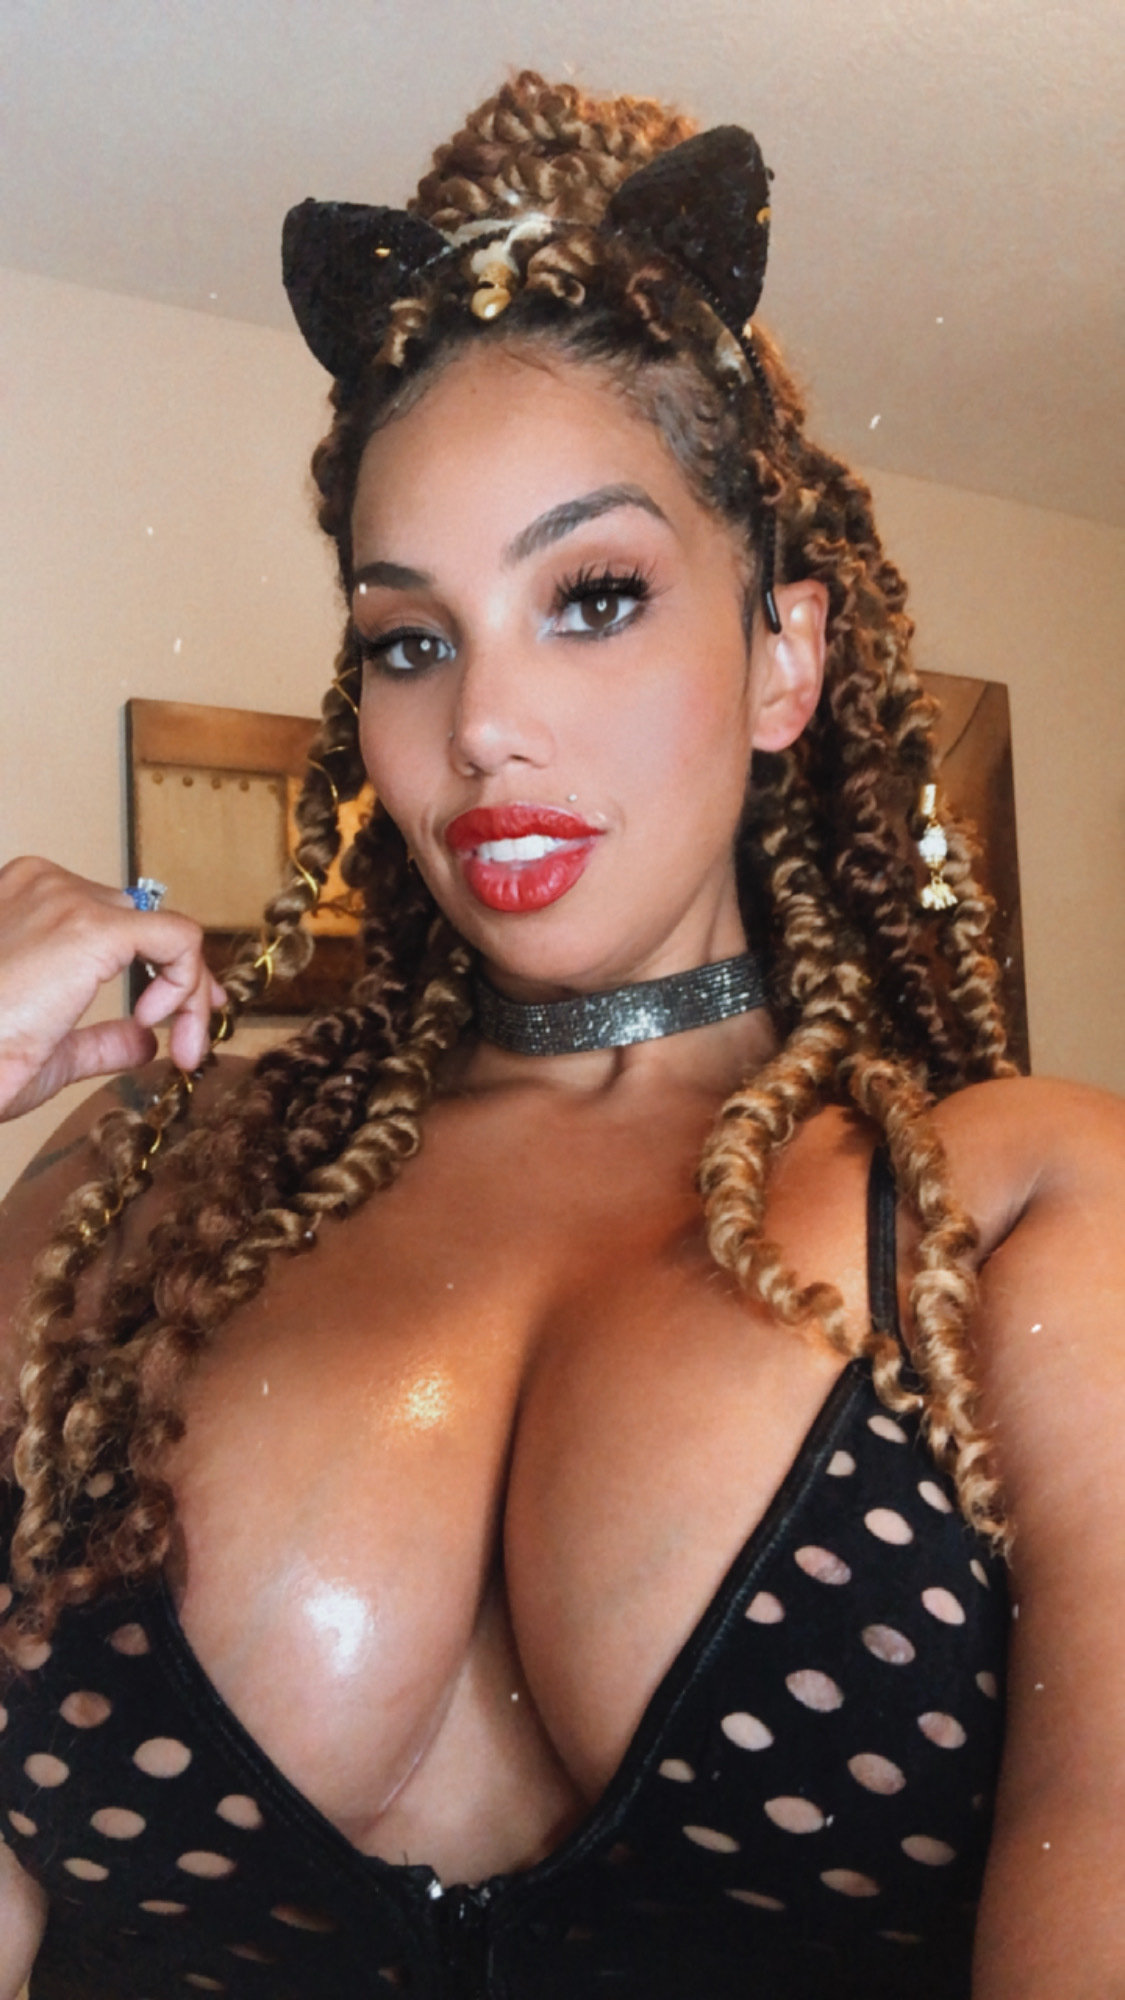 You are currently viewing pretty.z.kitty Onlyfans Model from ATL